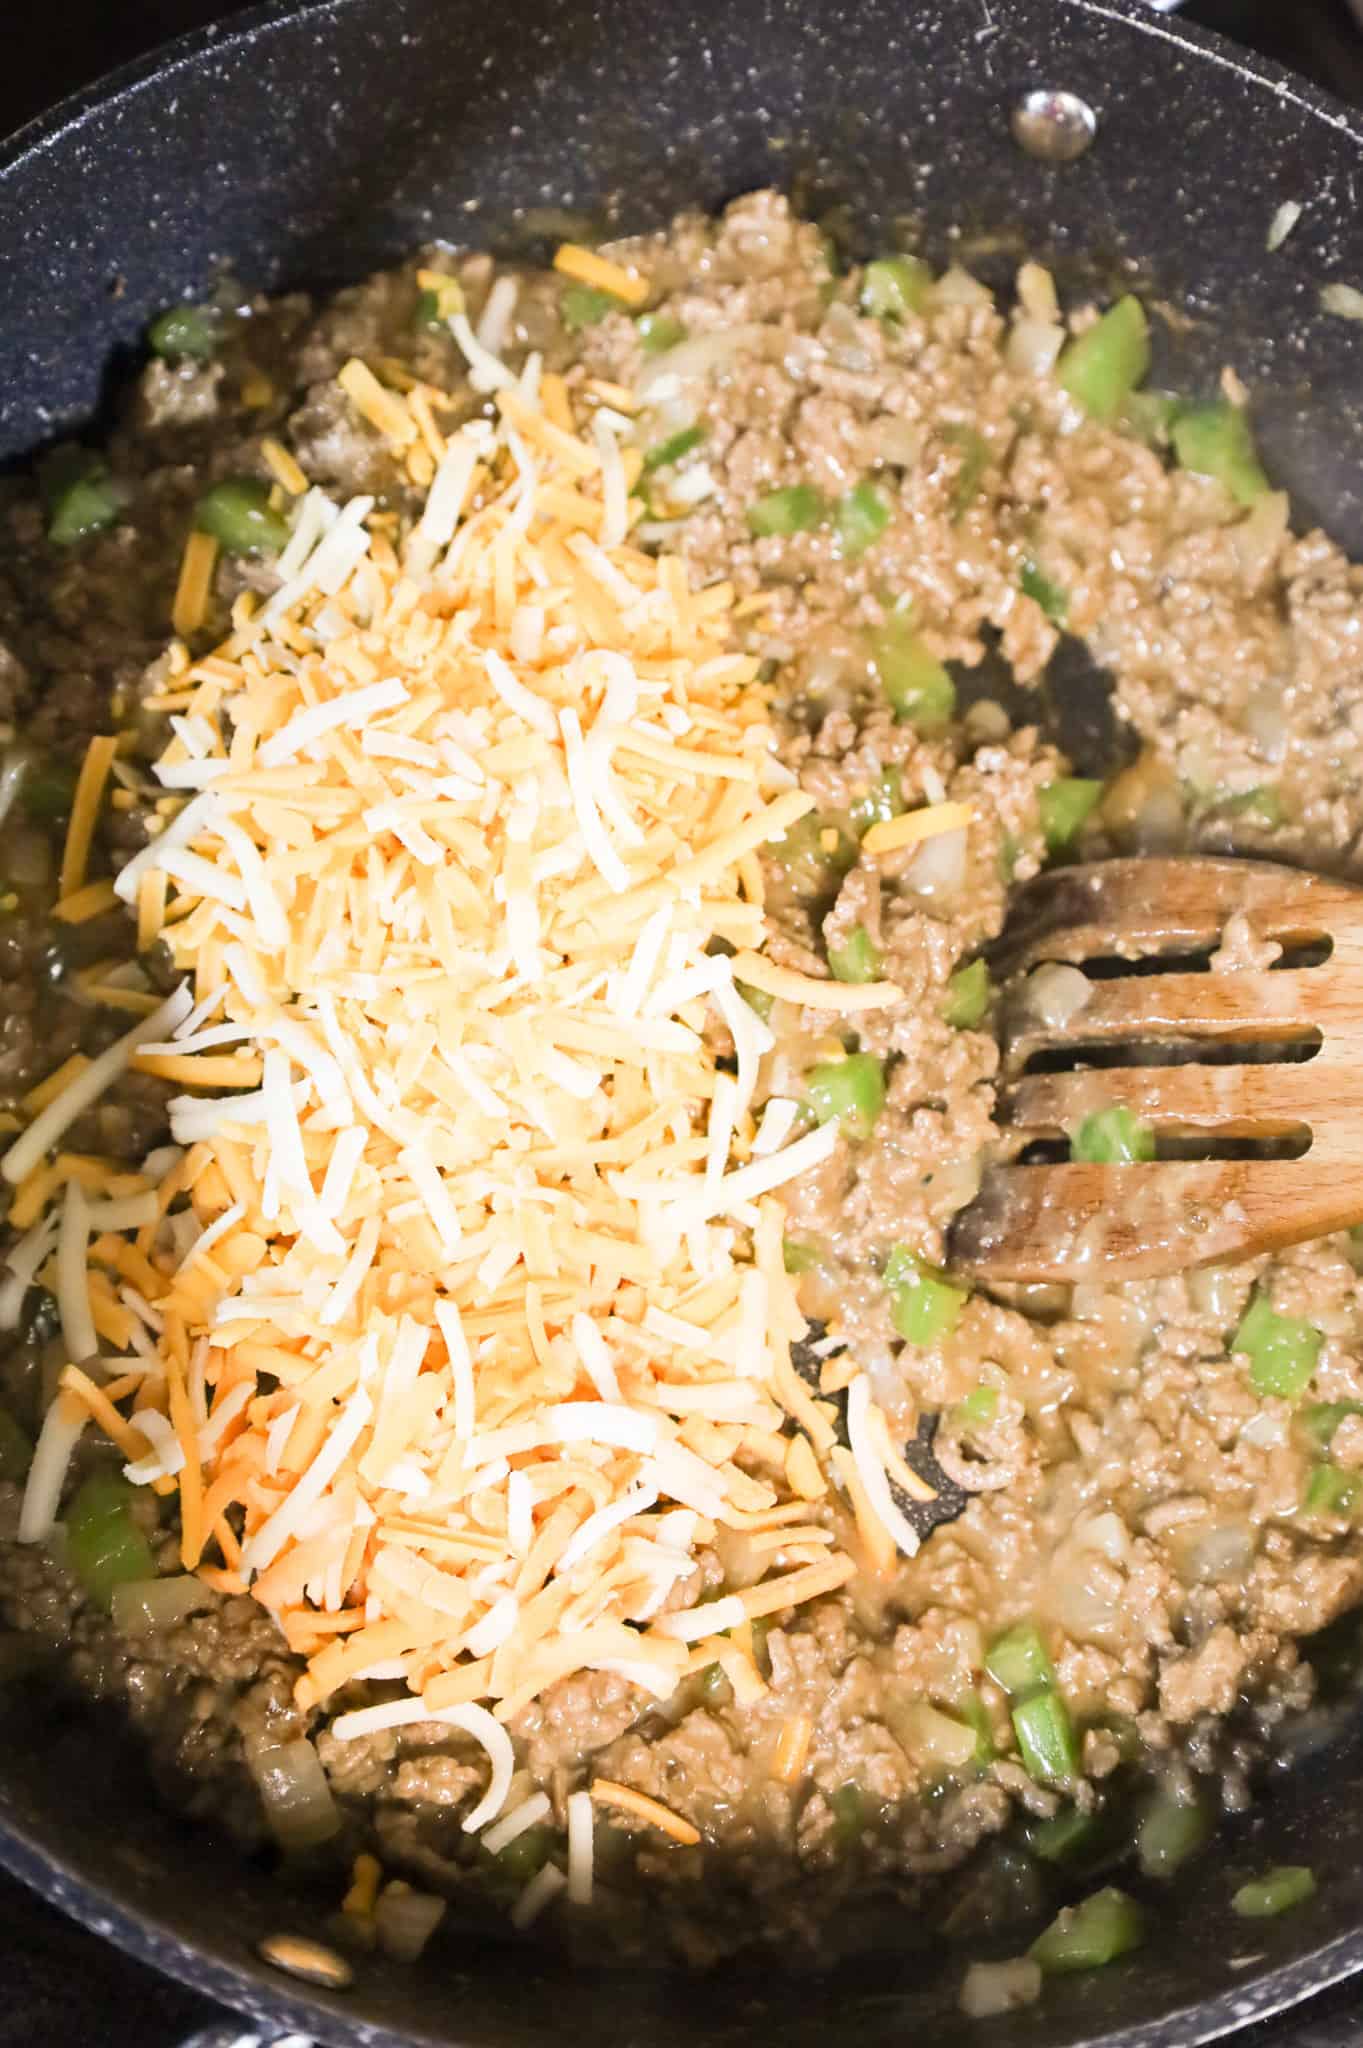 shredded cheese added to ground beef and cheddar soup mixture in a skillet